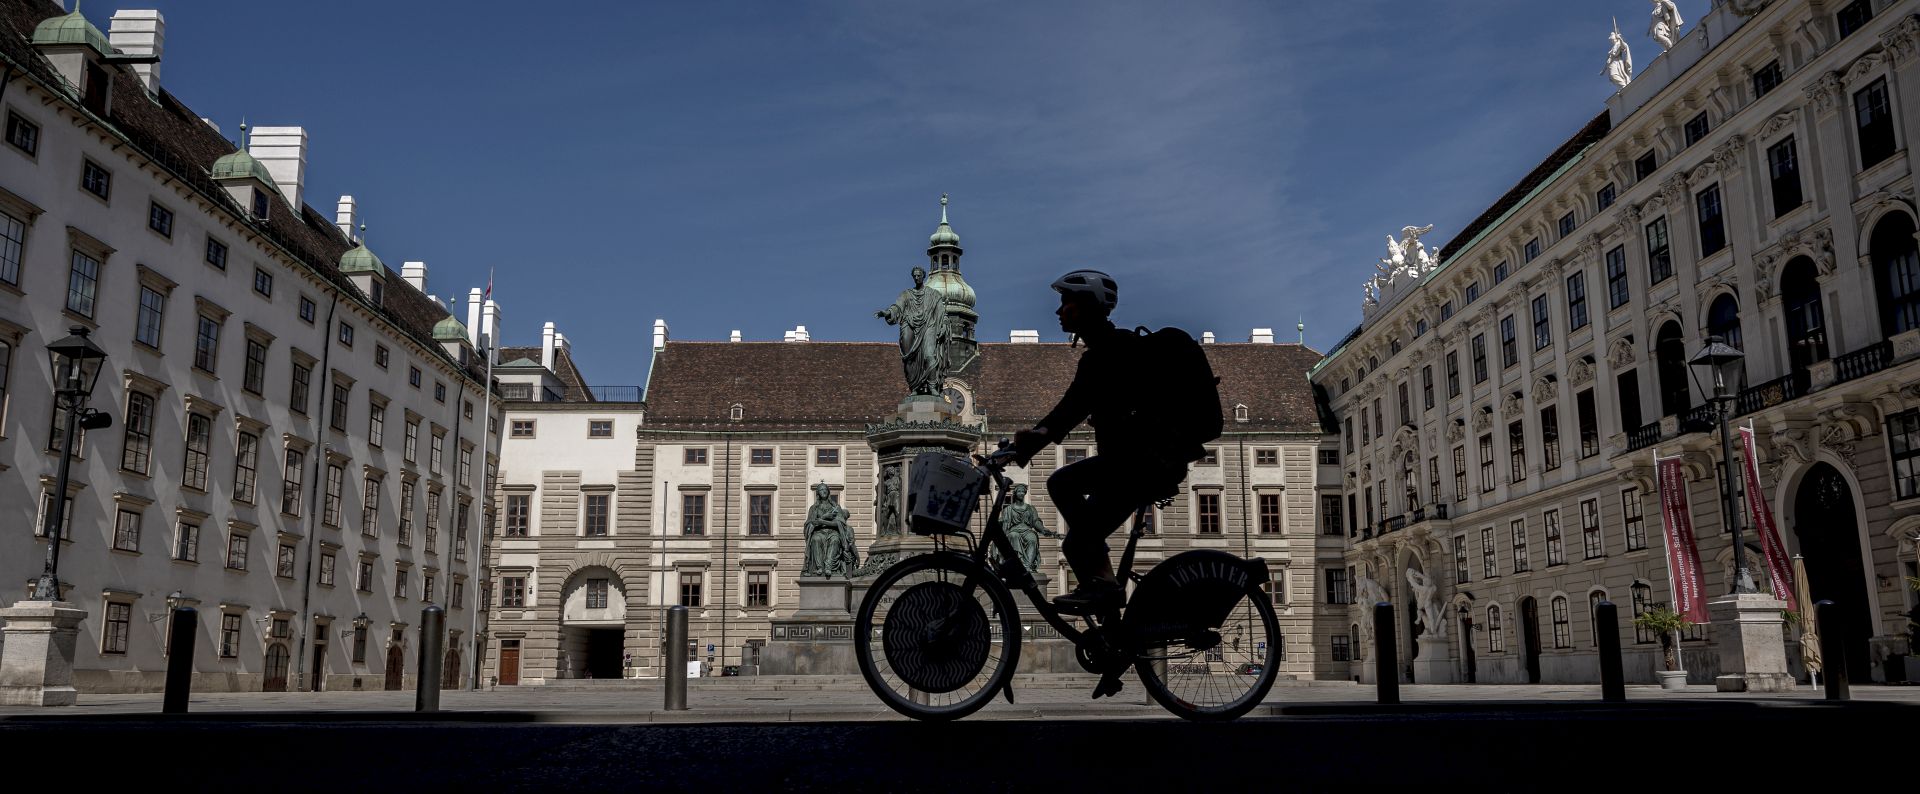 epa08366685 A cyclist rides across the Inner Castle Court (Innerer Burghof) of the Hofburg Palace in Vienna, Austria, 16 April 2020. Non essential stores with a shop area under 400 square meters, hardware stores, garden centres and federal parks are allowed to reopen under strict safety measures to slow down the ongoing pandemic of the COVID-19 disease caused by the SARS-CoV-2 coronavirus since 14 April 2020. The government has ordered to wear face masks in supermarkets, pharmacies, various kind of opened shops, public transportation and car pools.  EPA/CHRISTIAN BRUNA